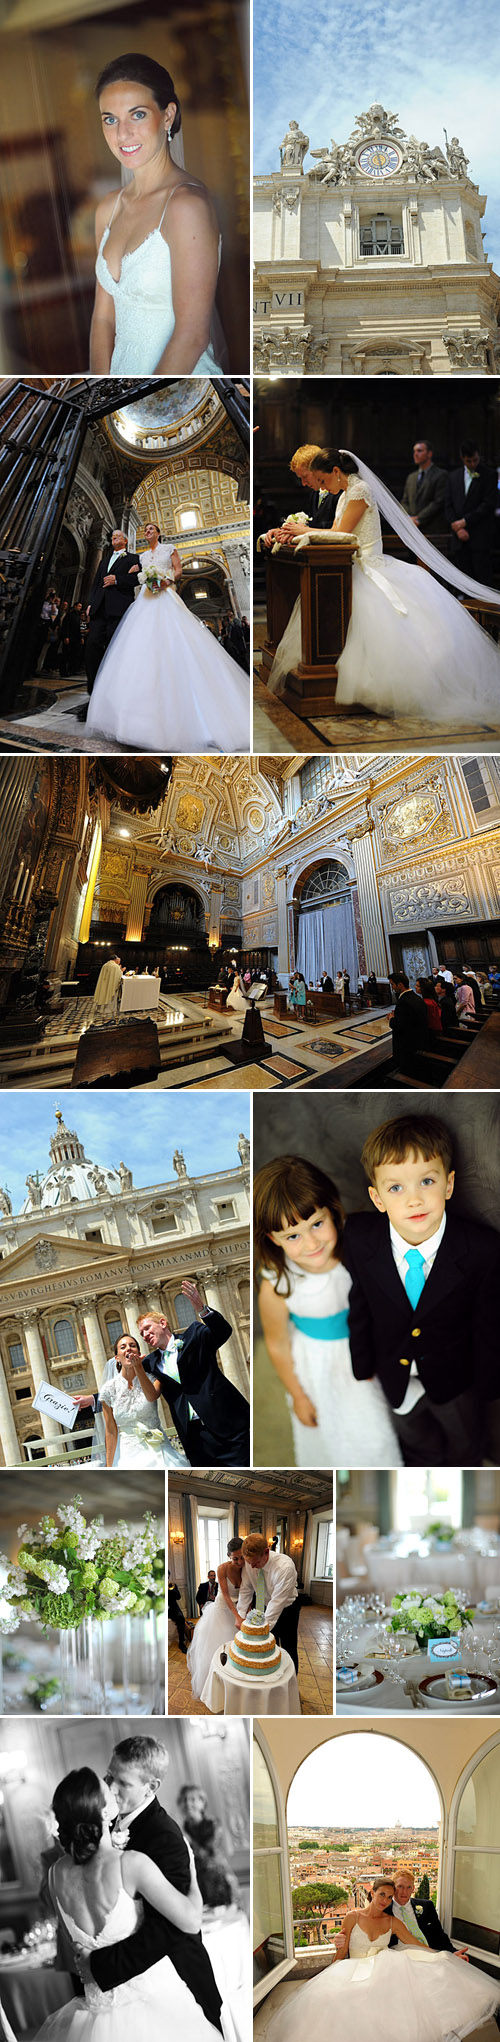 Wedding ceremony at the Vatican in Rome by top Italian wedding planner Brenda Babcock of Italia Celebrations